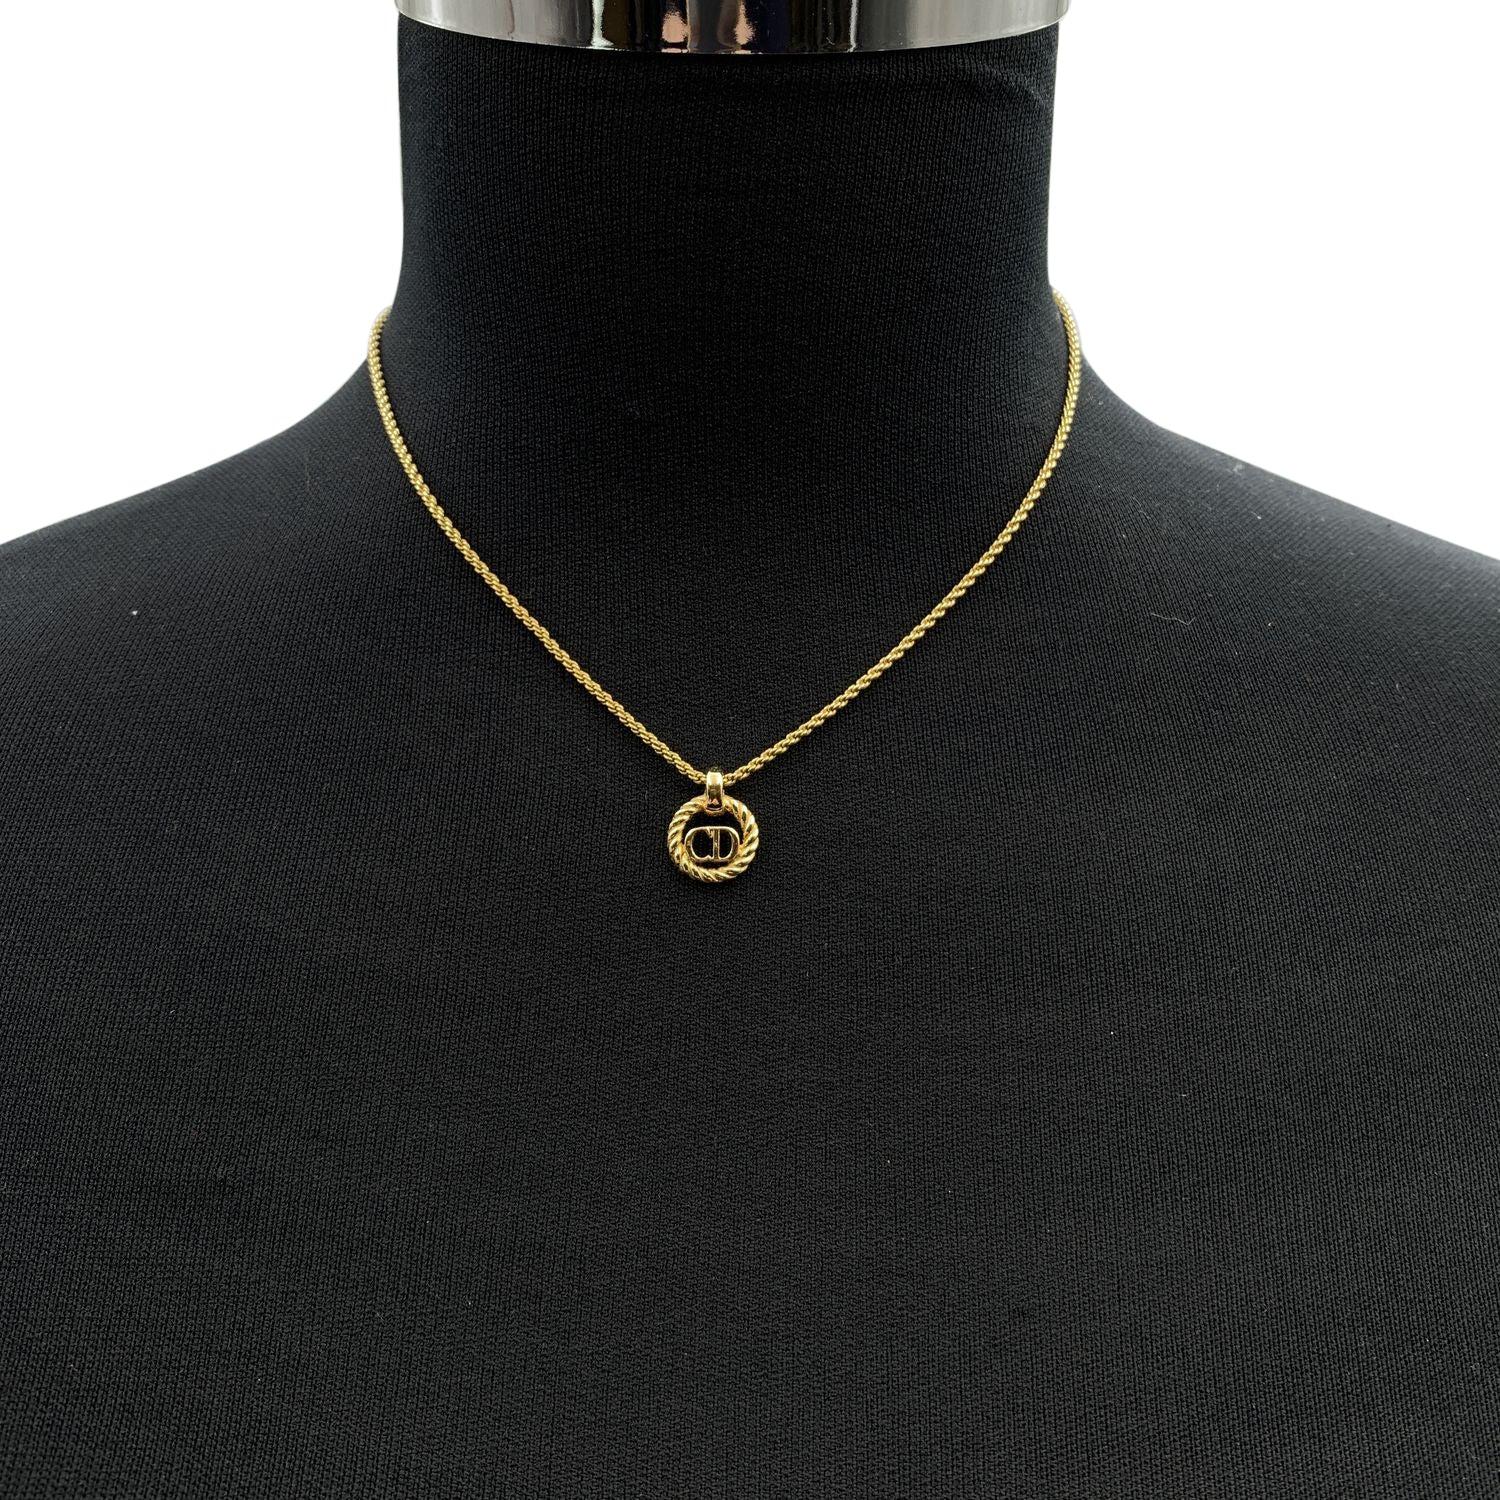 Vintage Christian Dior gold metal chain necklace with small round CD logo pendant. Lobster closure. Small CD charm at the end of the necklace. Chain length: about 16.5 inches - 41.8 cm Condition A - EXCELLENT Gently used. Please, look carefully at